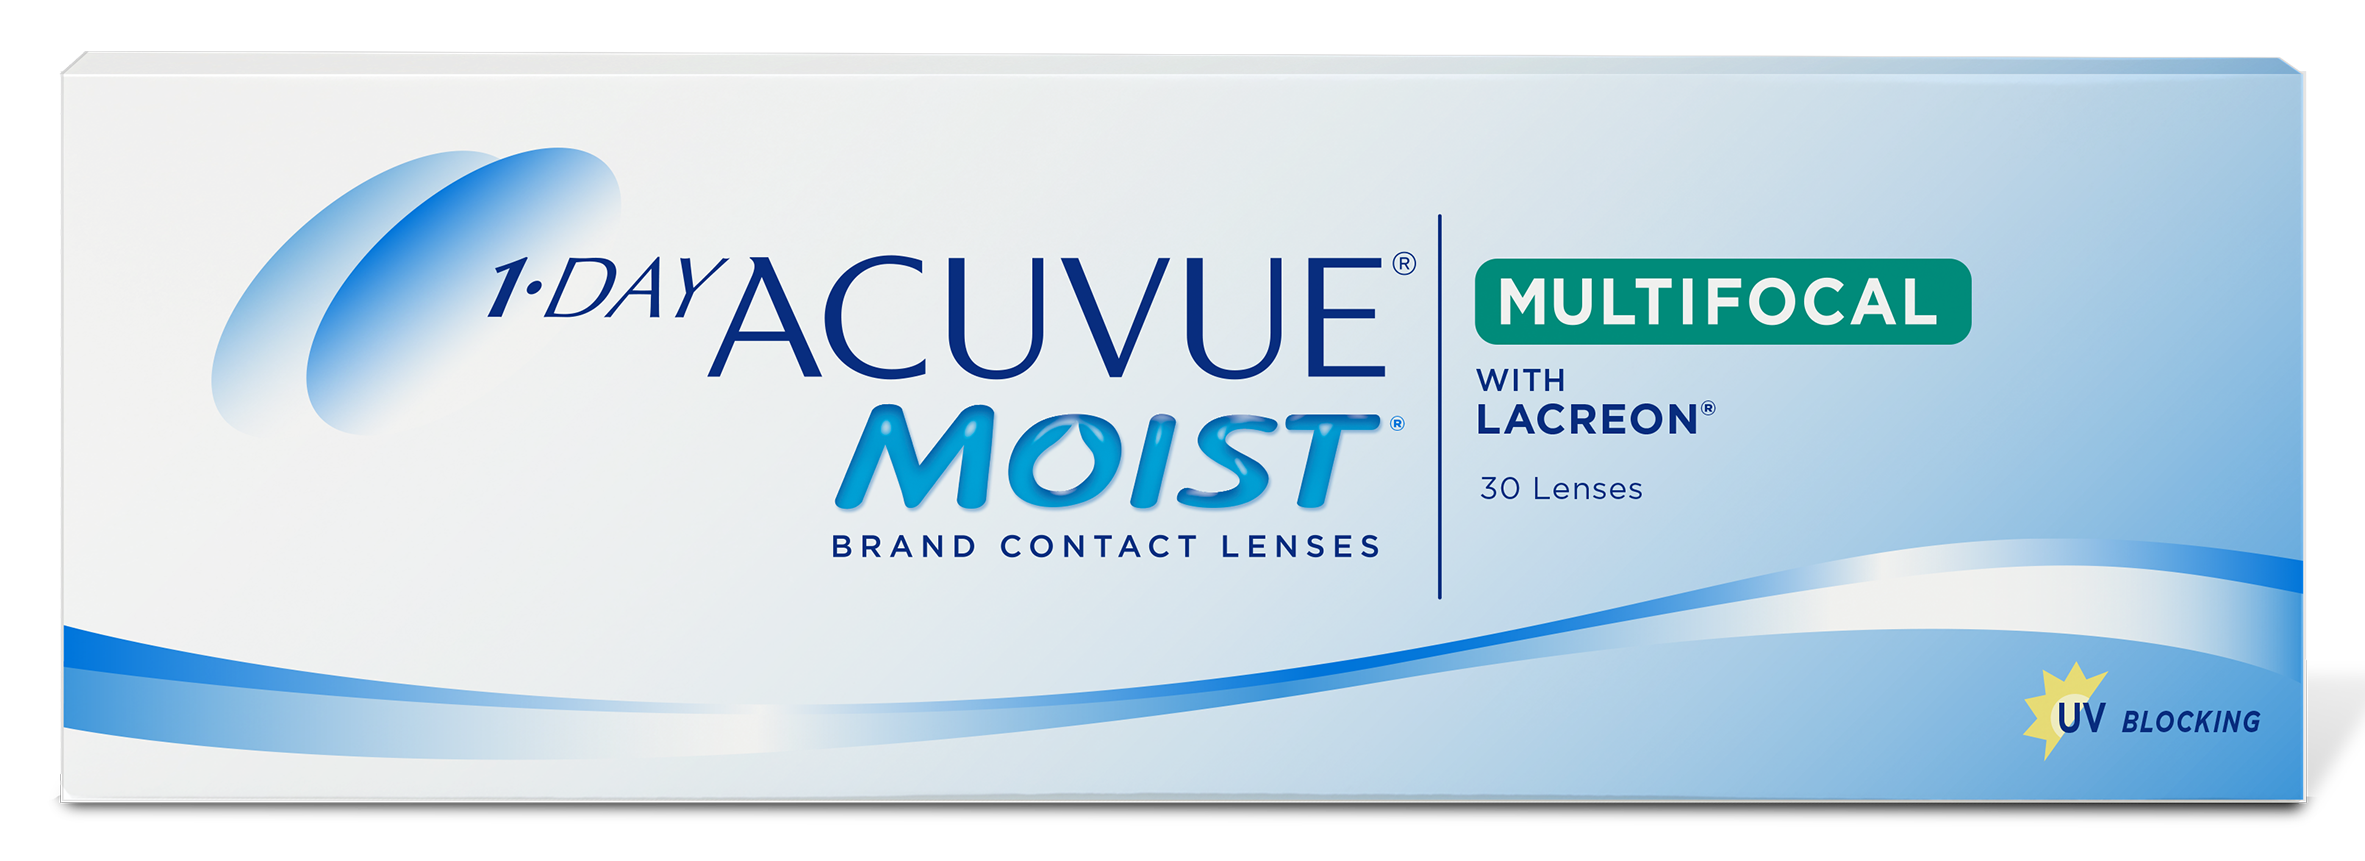 1-day-acuvue-moist-multifocal-contact-lenses-progressive-lens-look